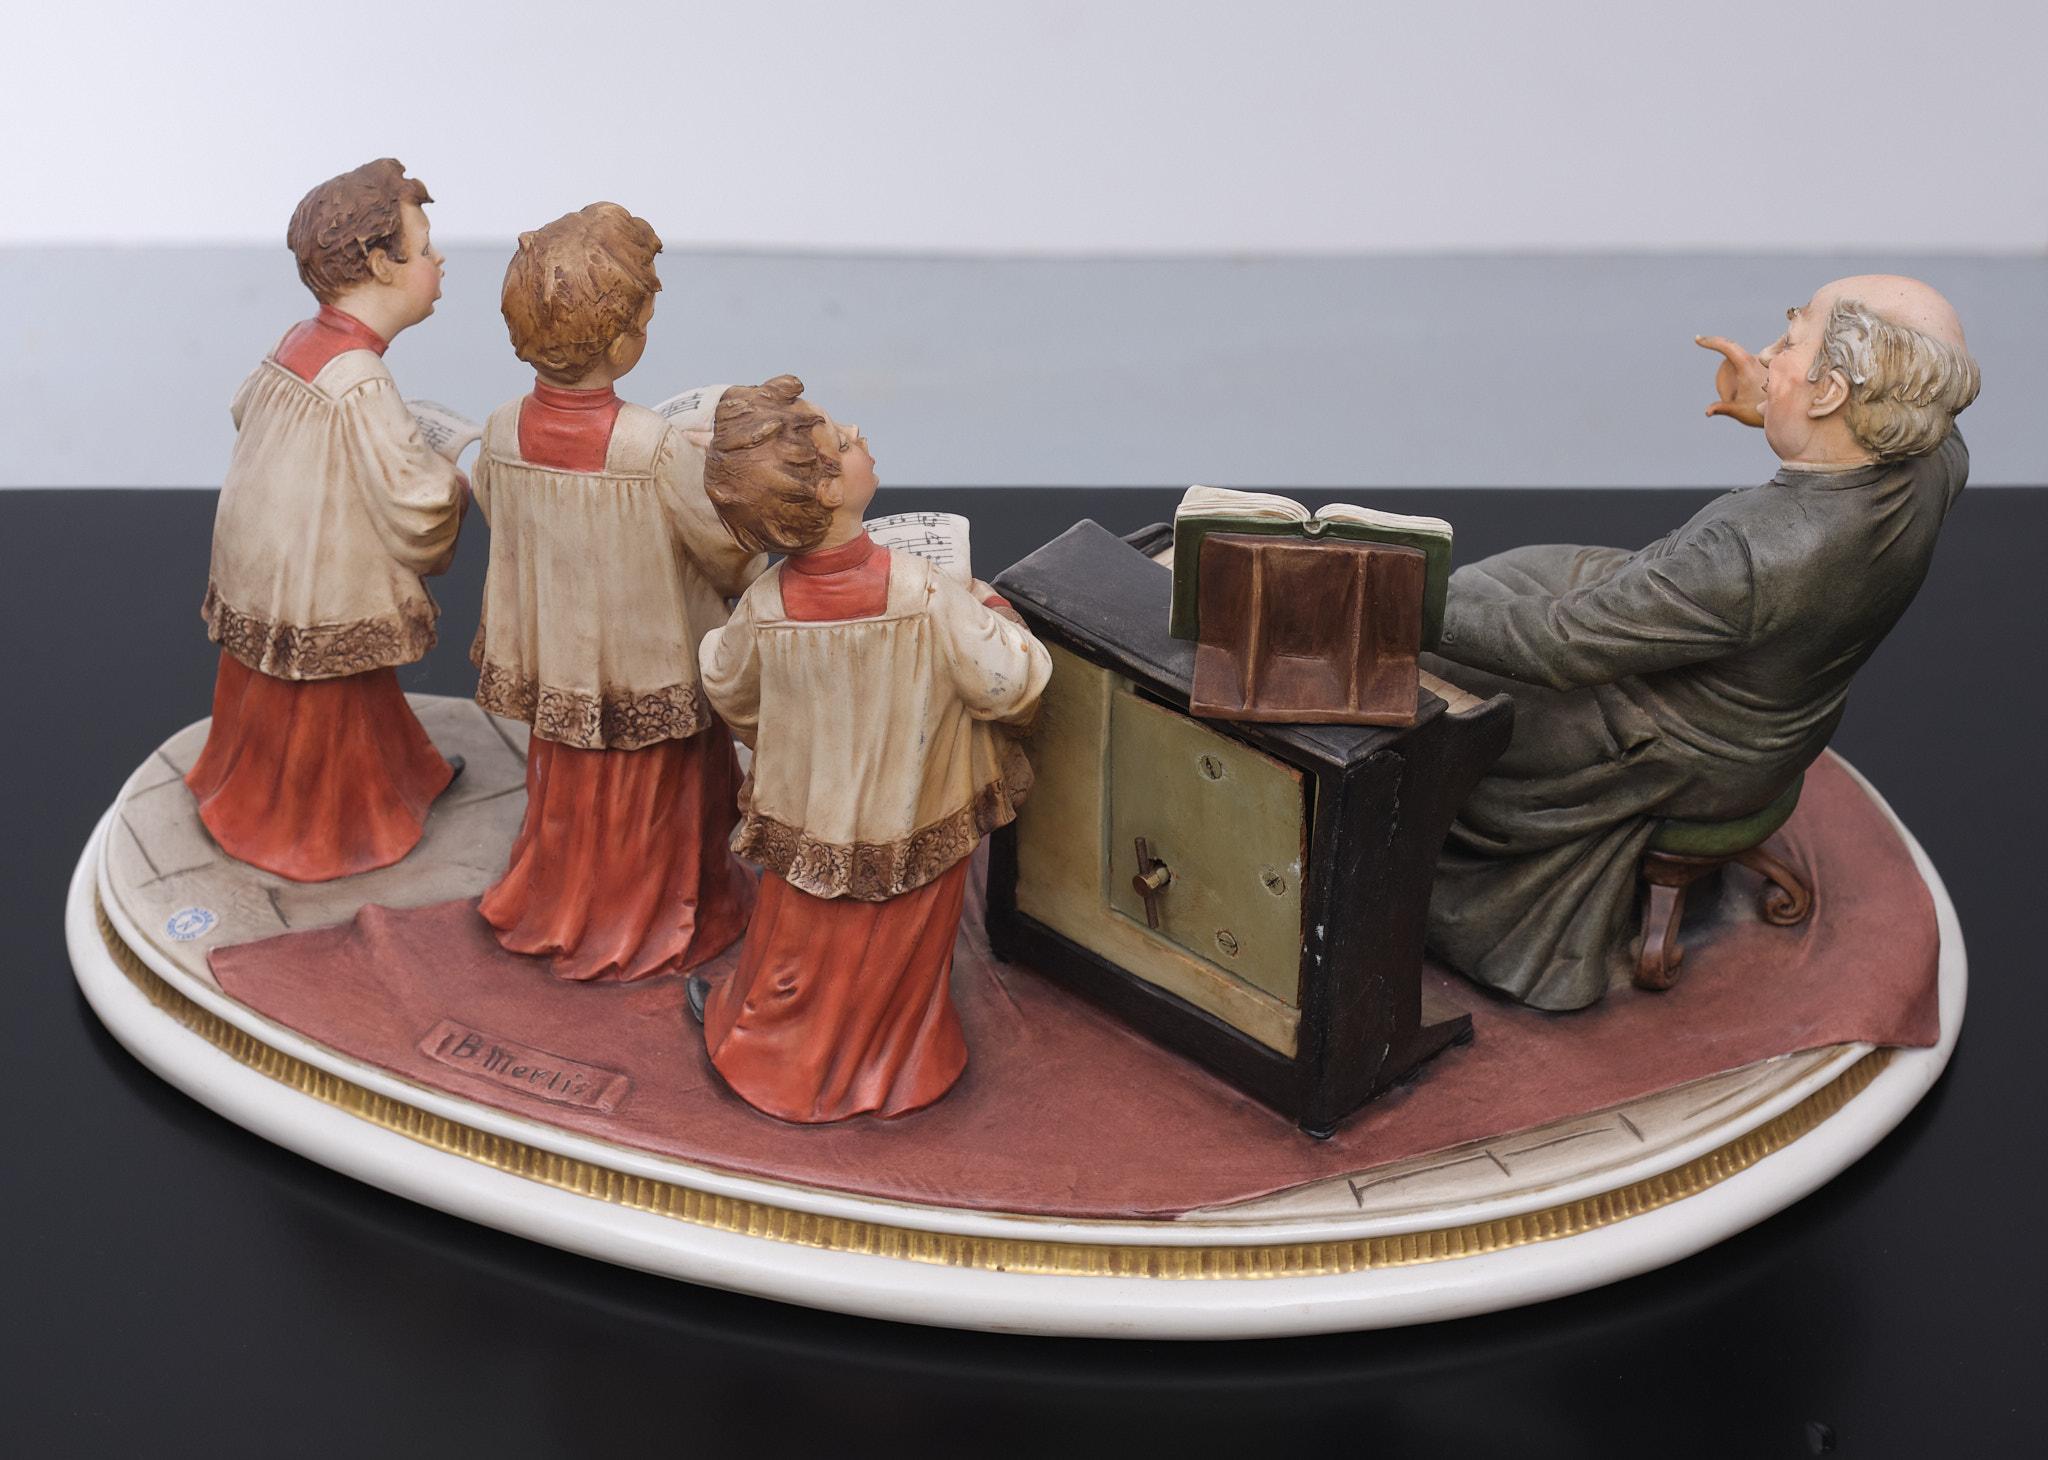 The choirboys. Three choirboys singing, directed by a priest, this
Capodimonte porcelain made on a kidney shaped base. Very nice
Romantic scene, included a music box. Not working at the moment.
Signed B Meril manufactured by king 1960s Italy.